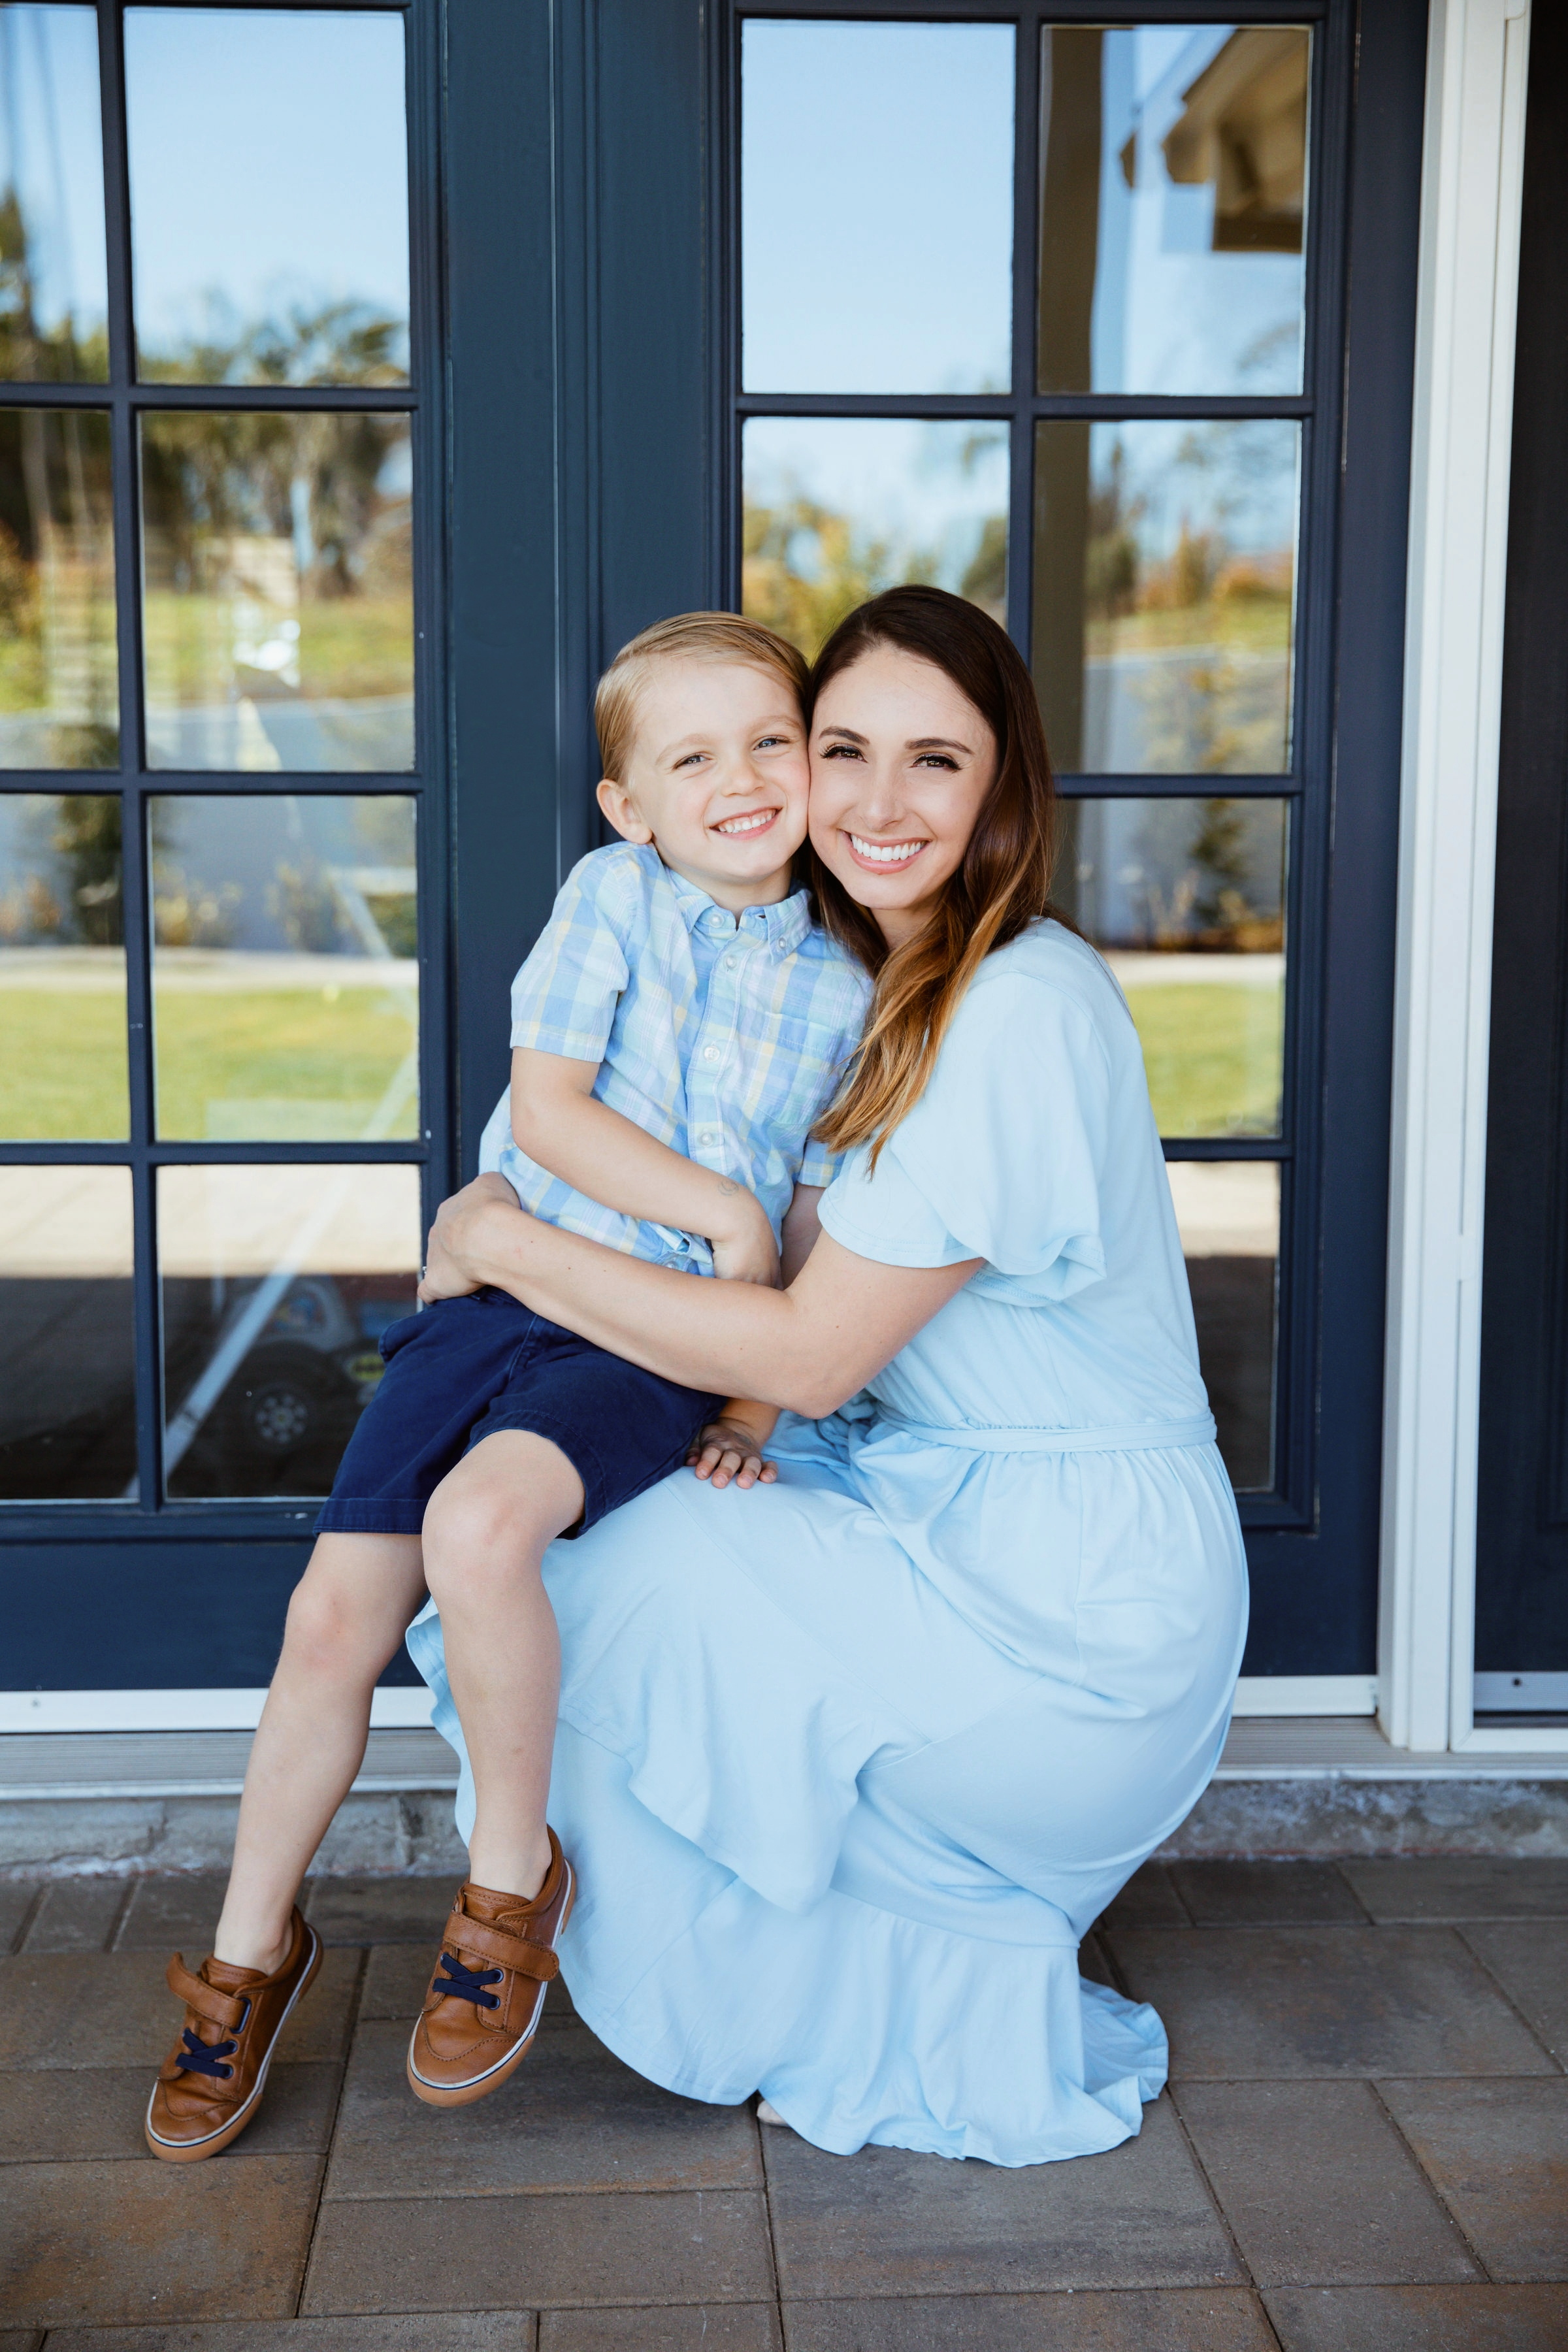 Spring and Easter Outfits for the Family - The Motherchic